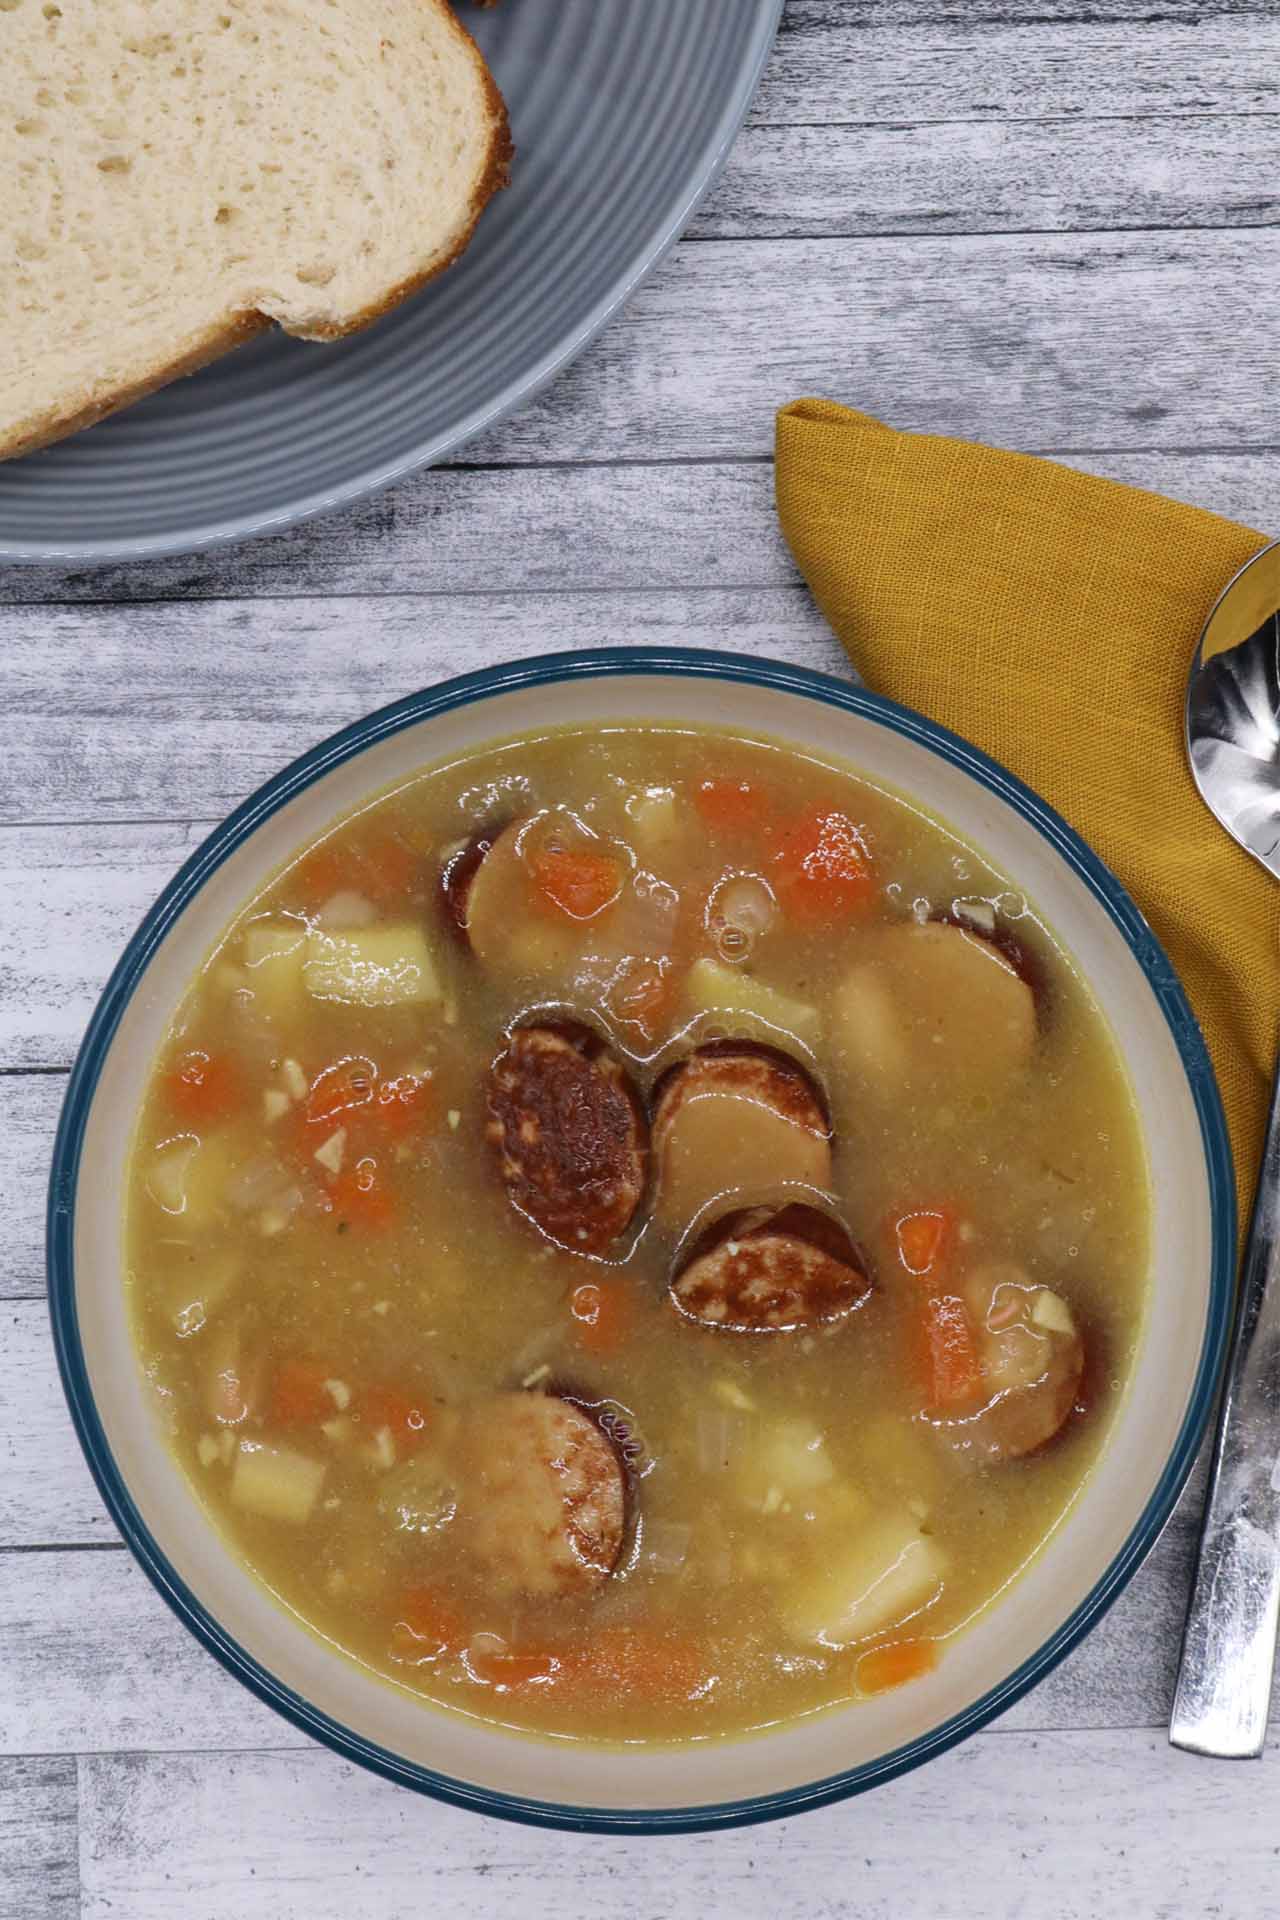 Smoked Sausage, Bean and Root Vegetable Soup